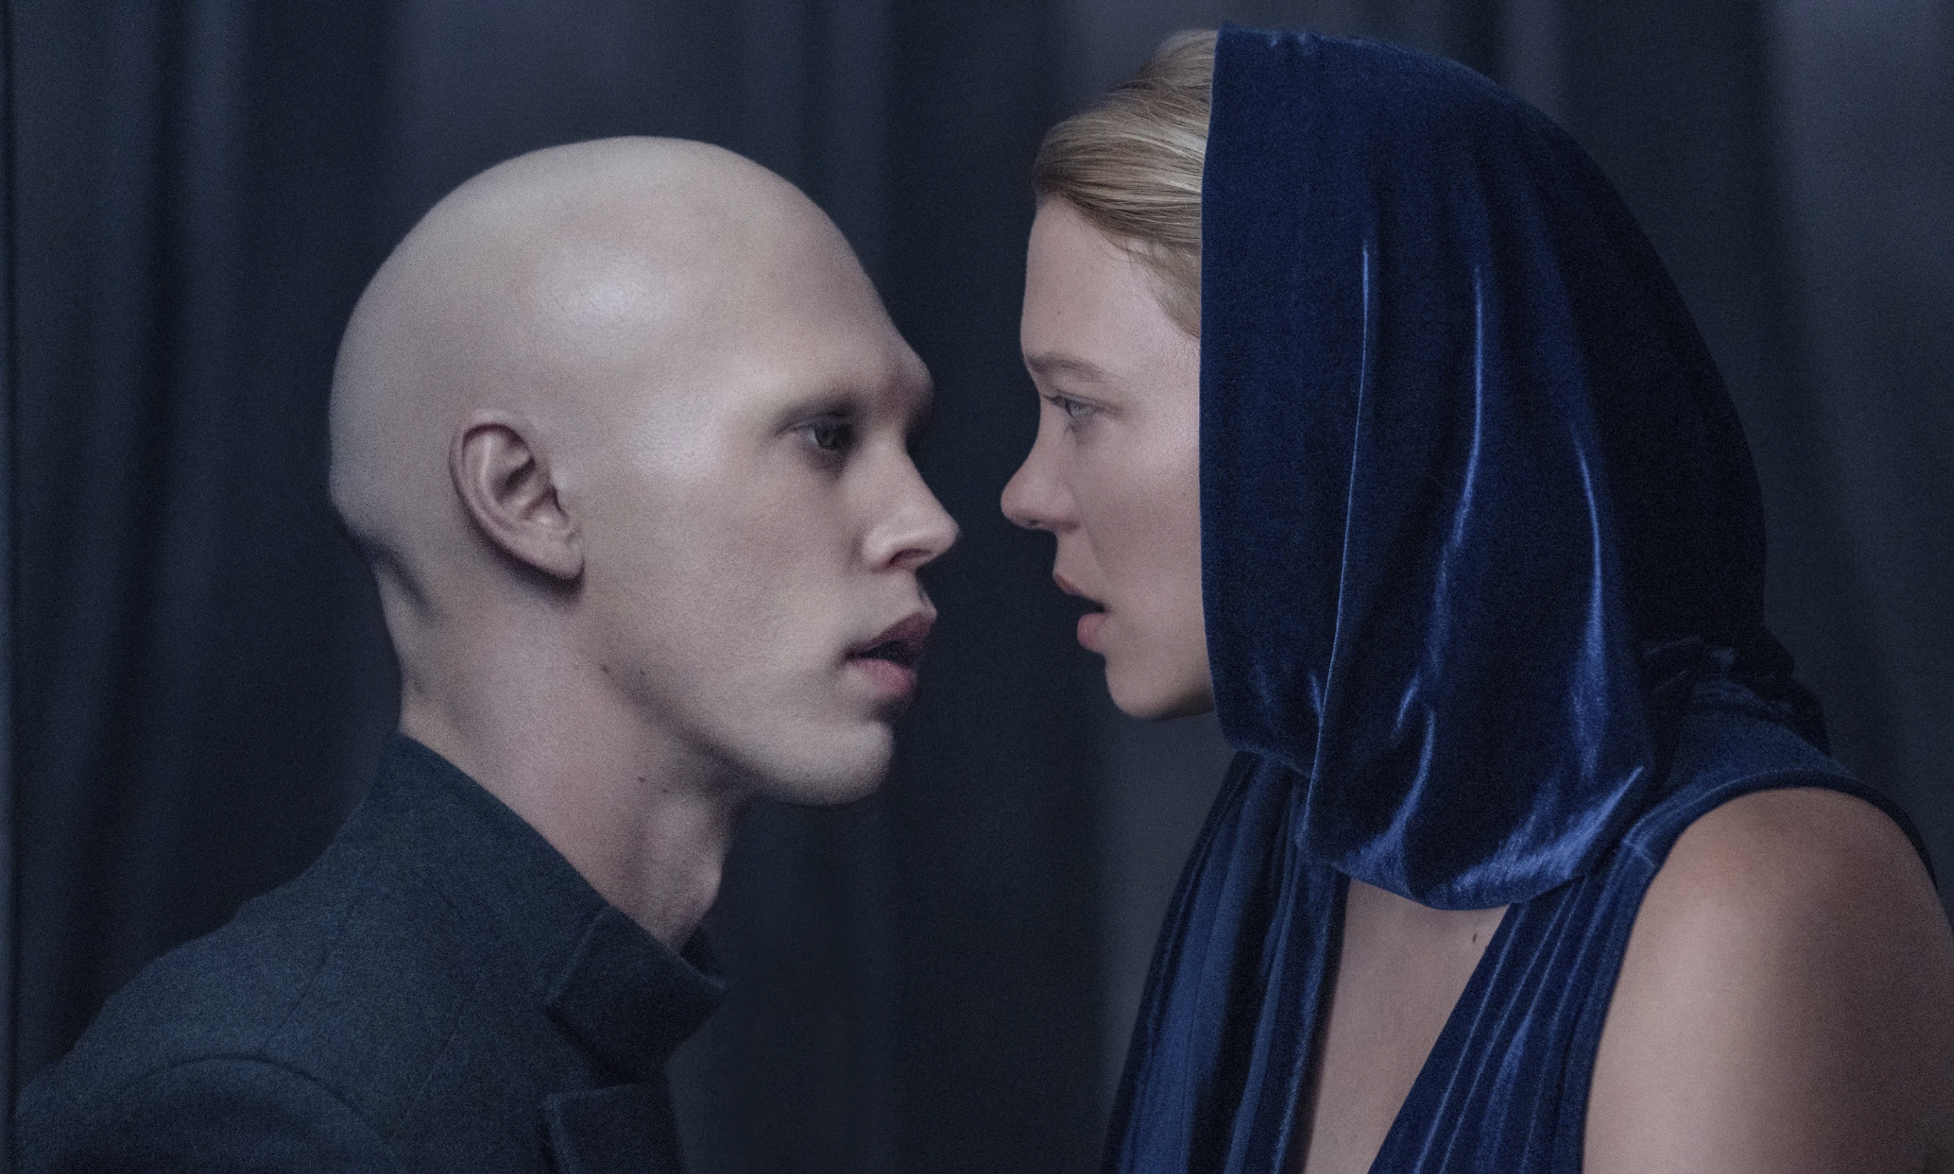 A pale young white man with a bald head and no eyebrows gazes at an attractive blonde woman wearing a blue hooded velvet dress. Their faces are close together.